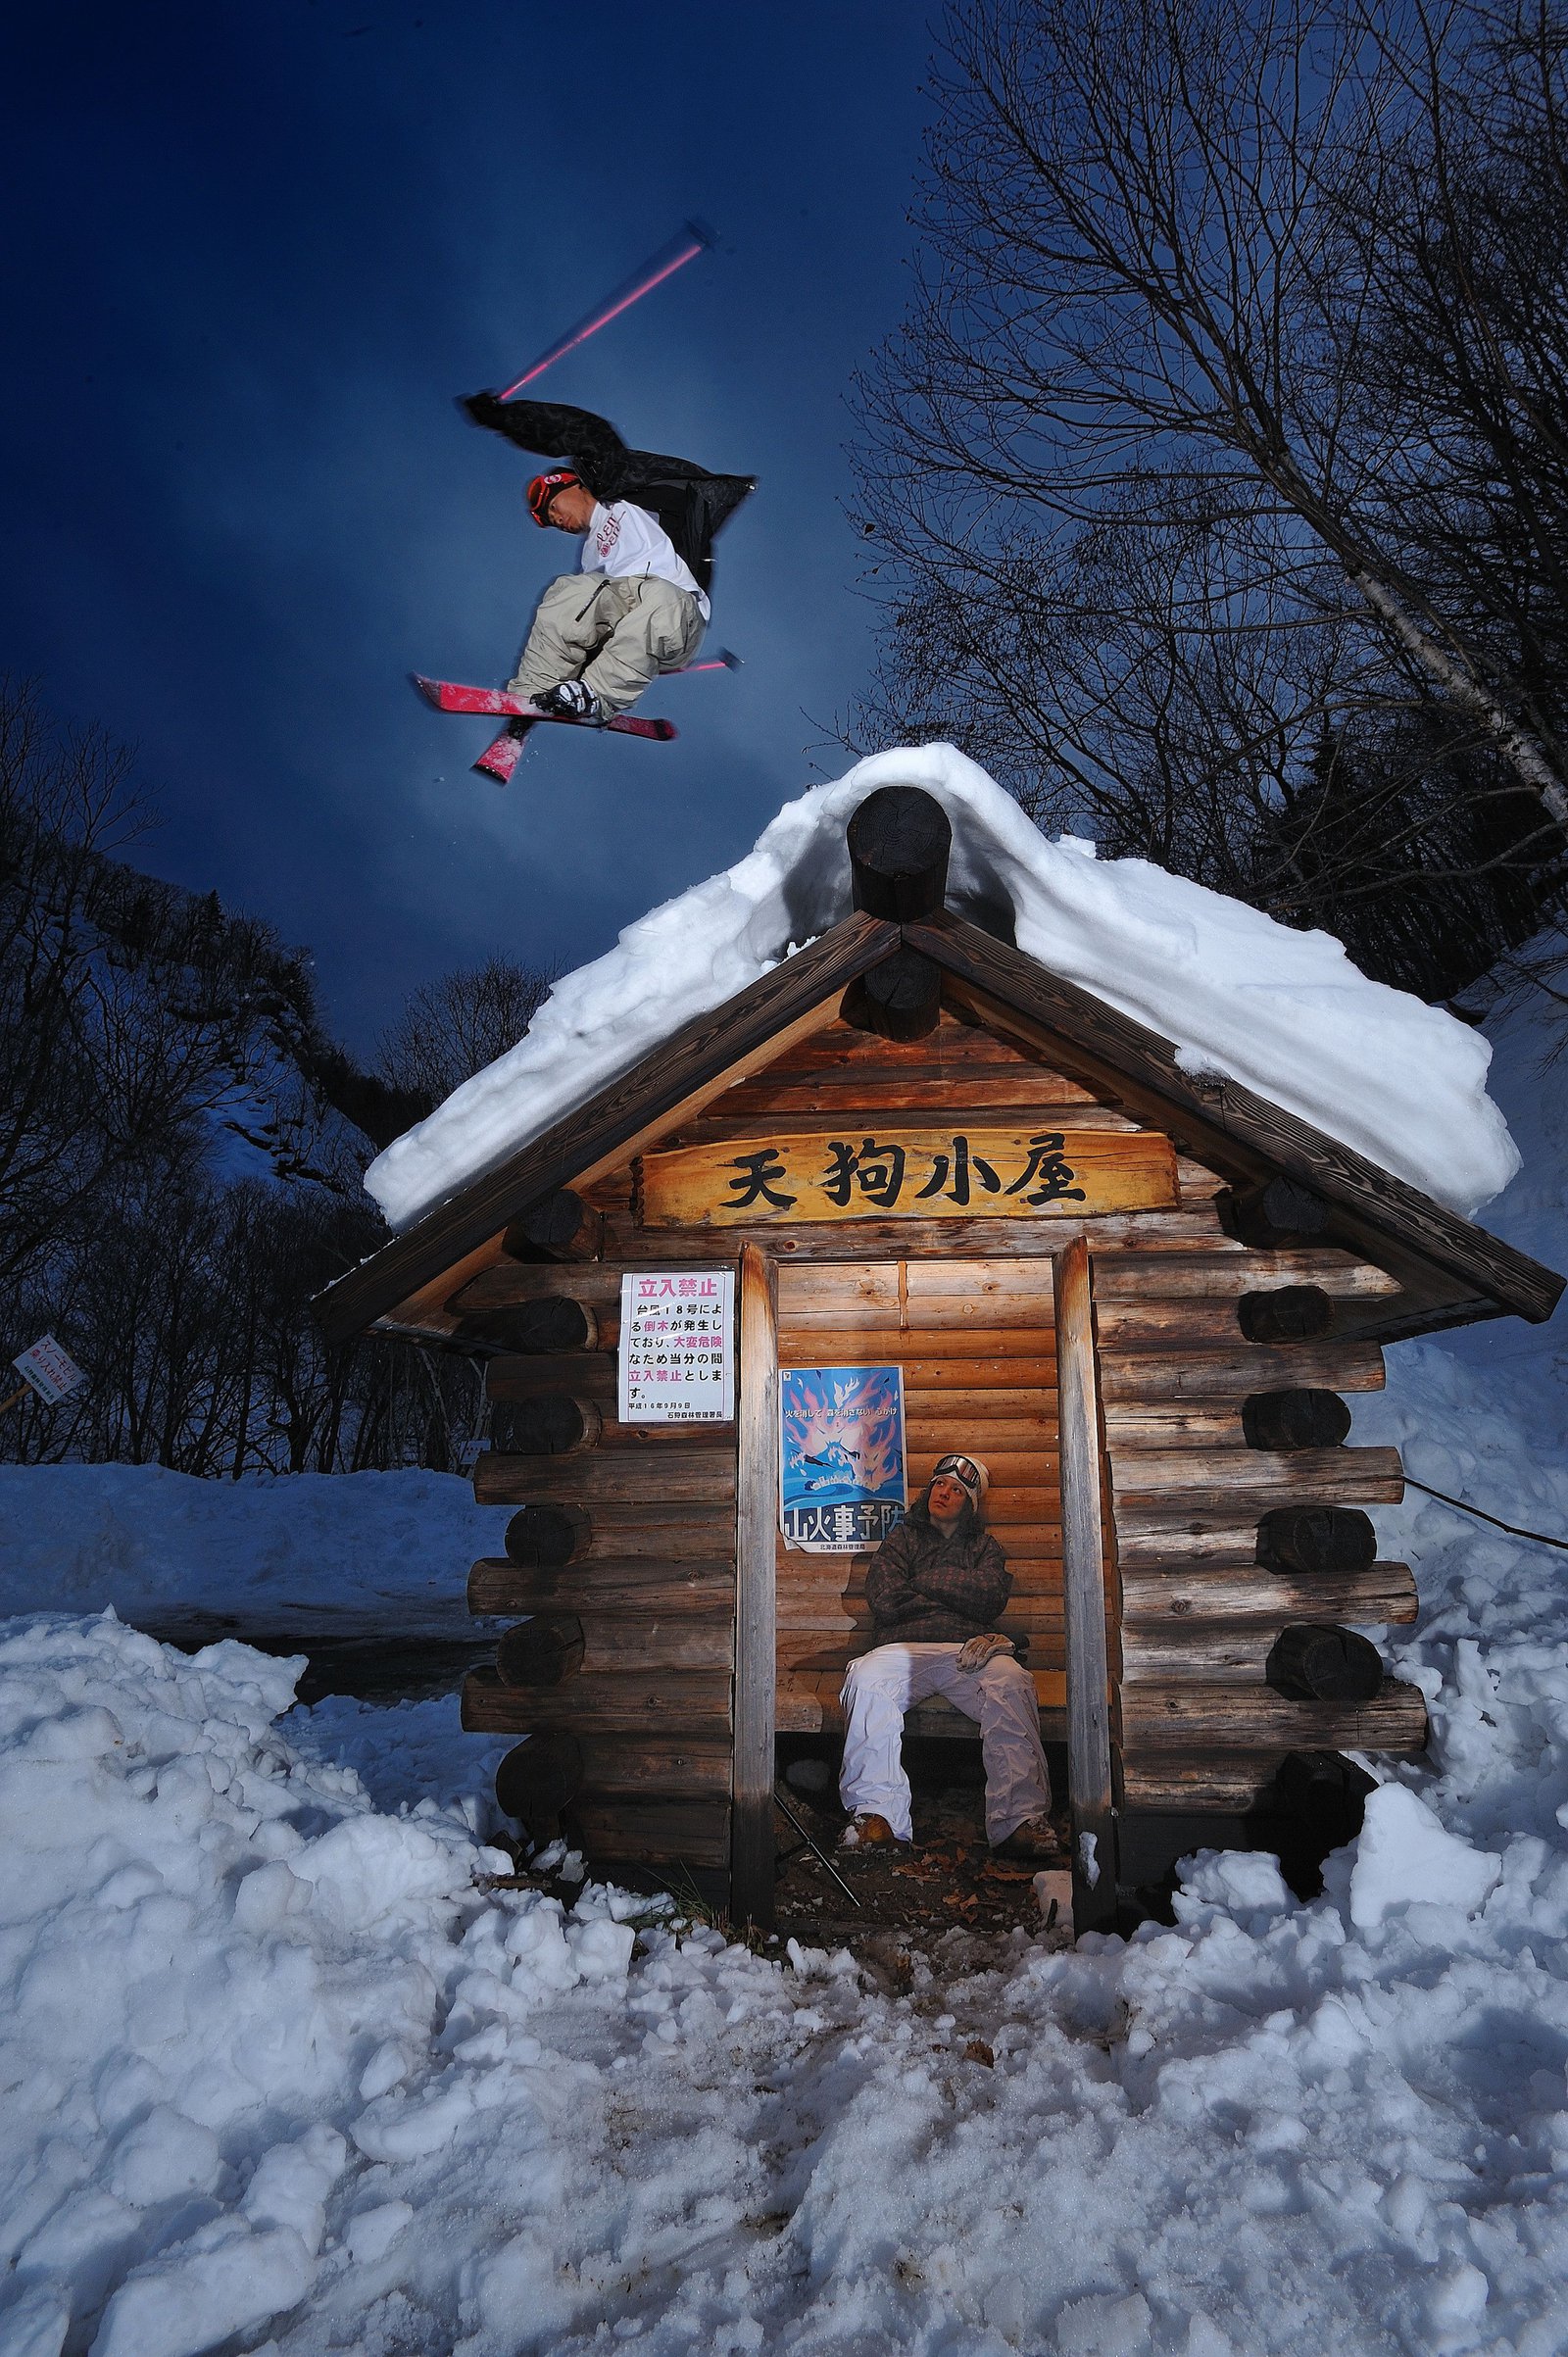 Jump over the rest house